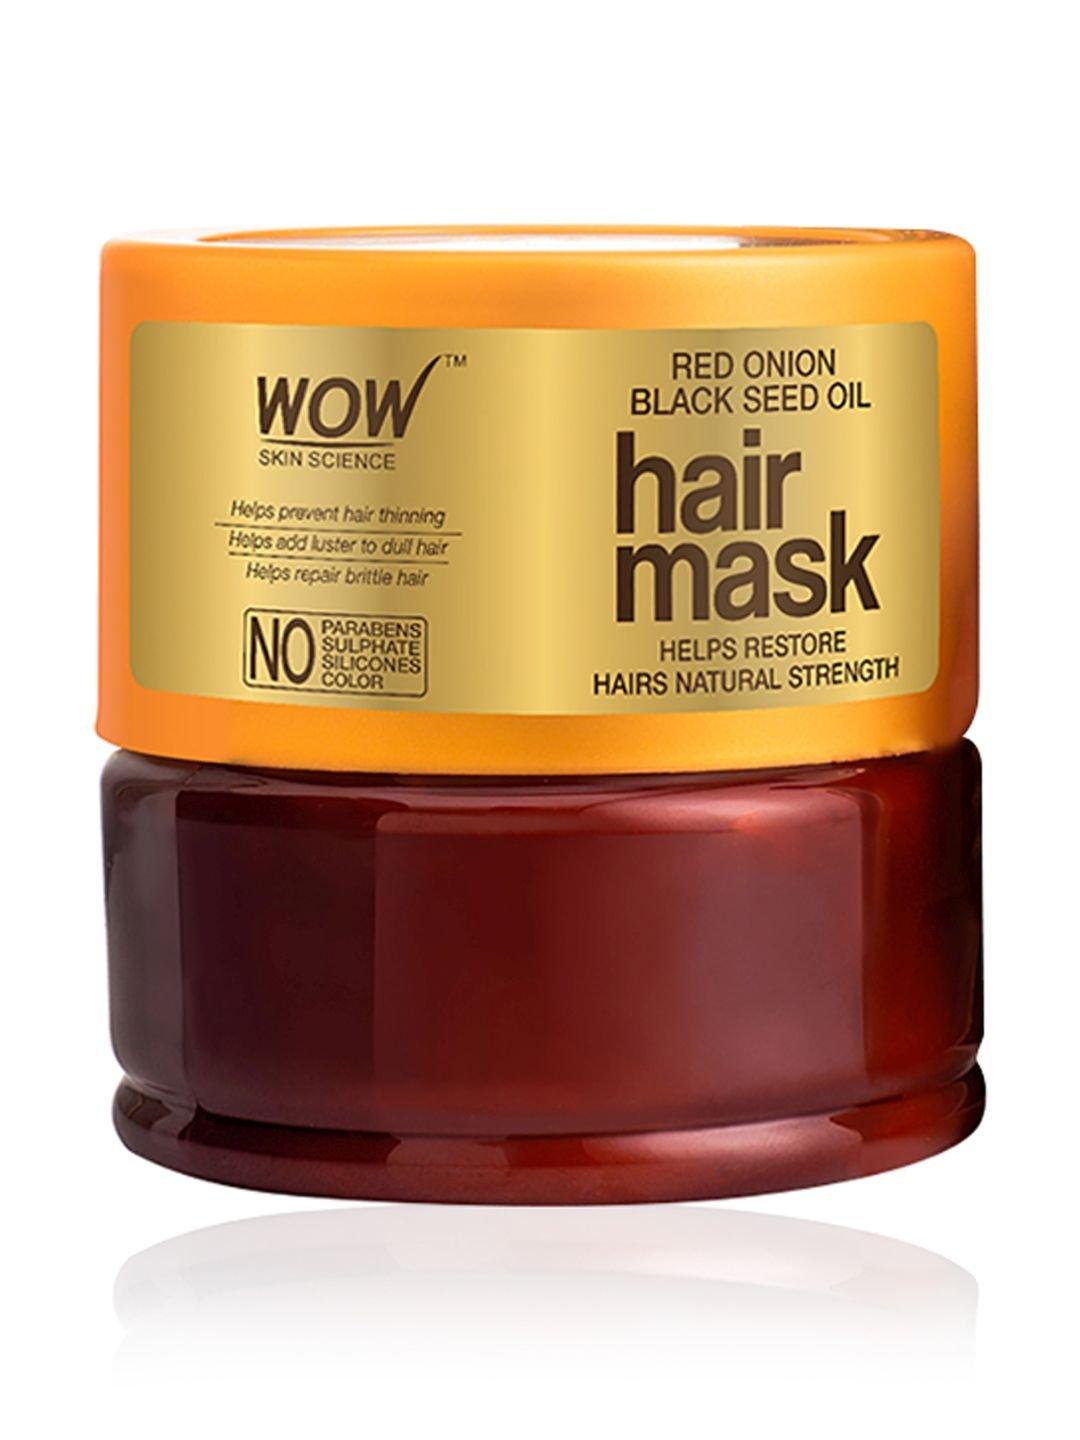 Wow Skin Science Onion Red Seed Oil Hair Mask 200 ml - Mrayti Store